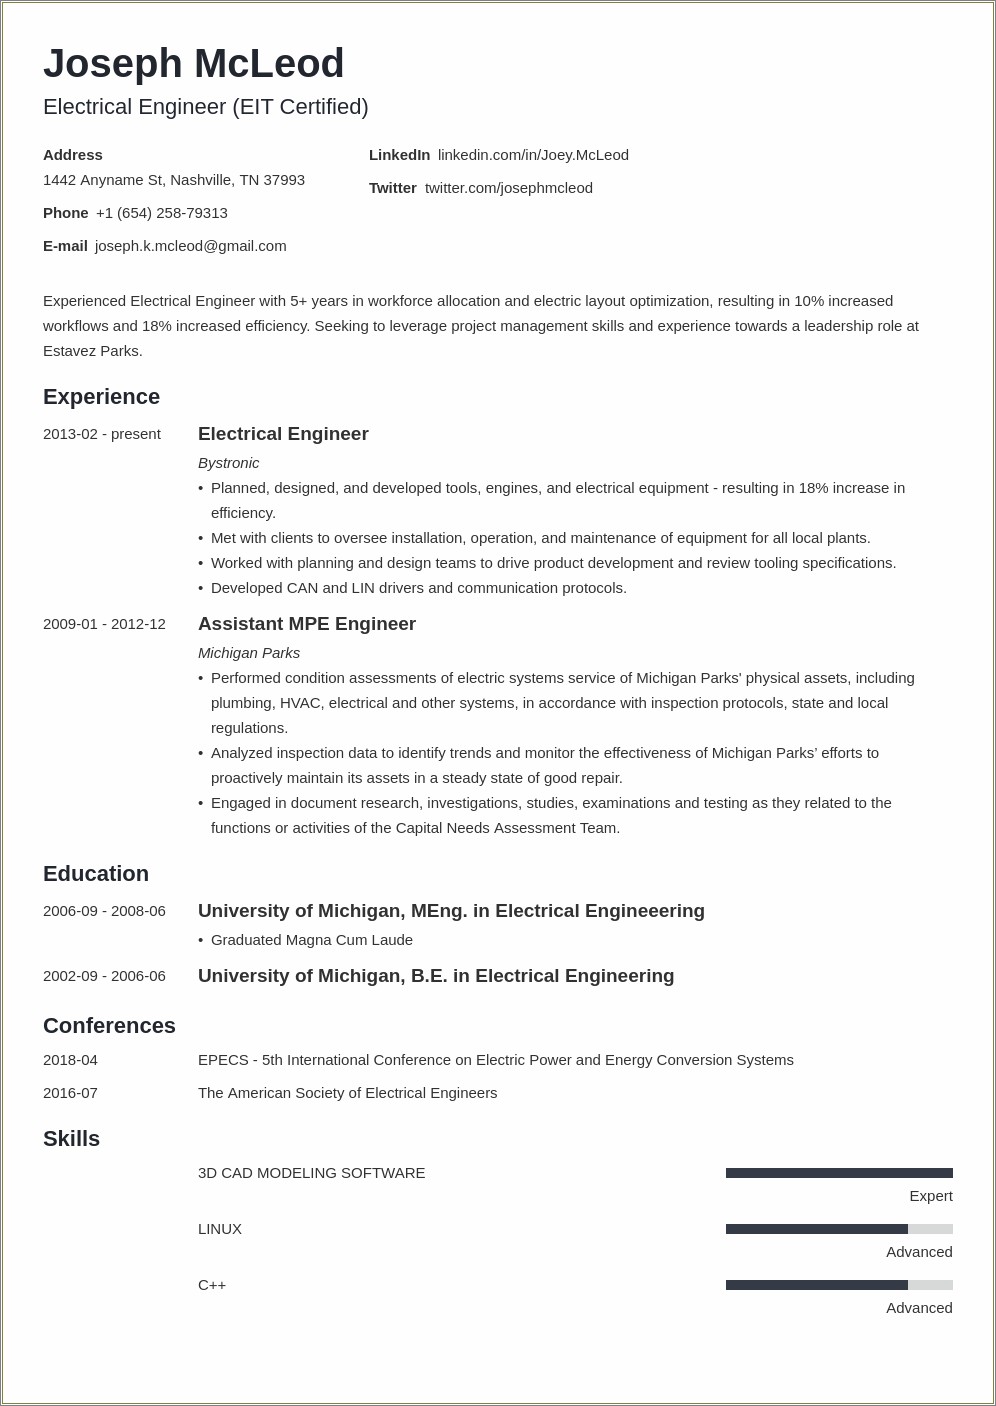 Electrical Engineering Entry Level Resume Examples